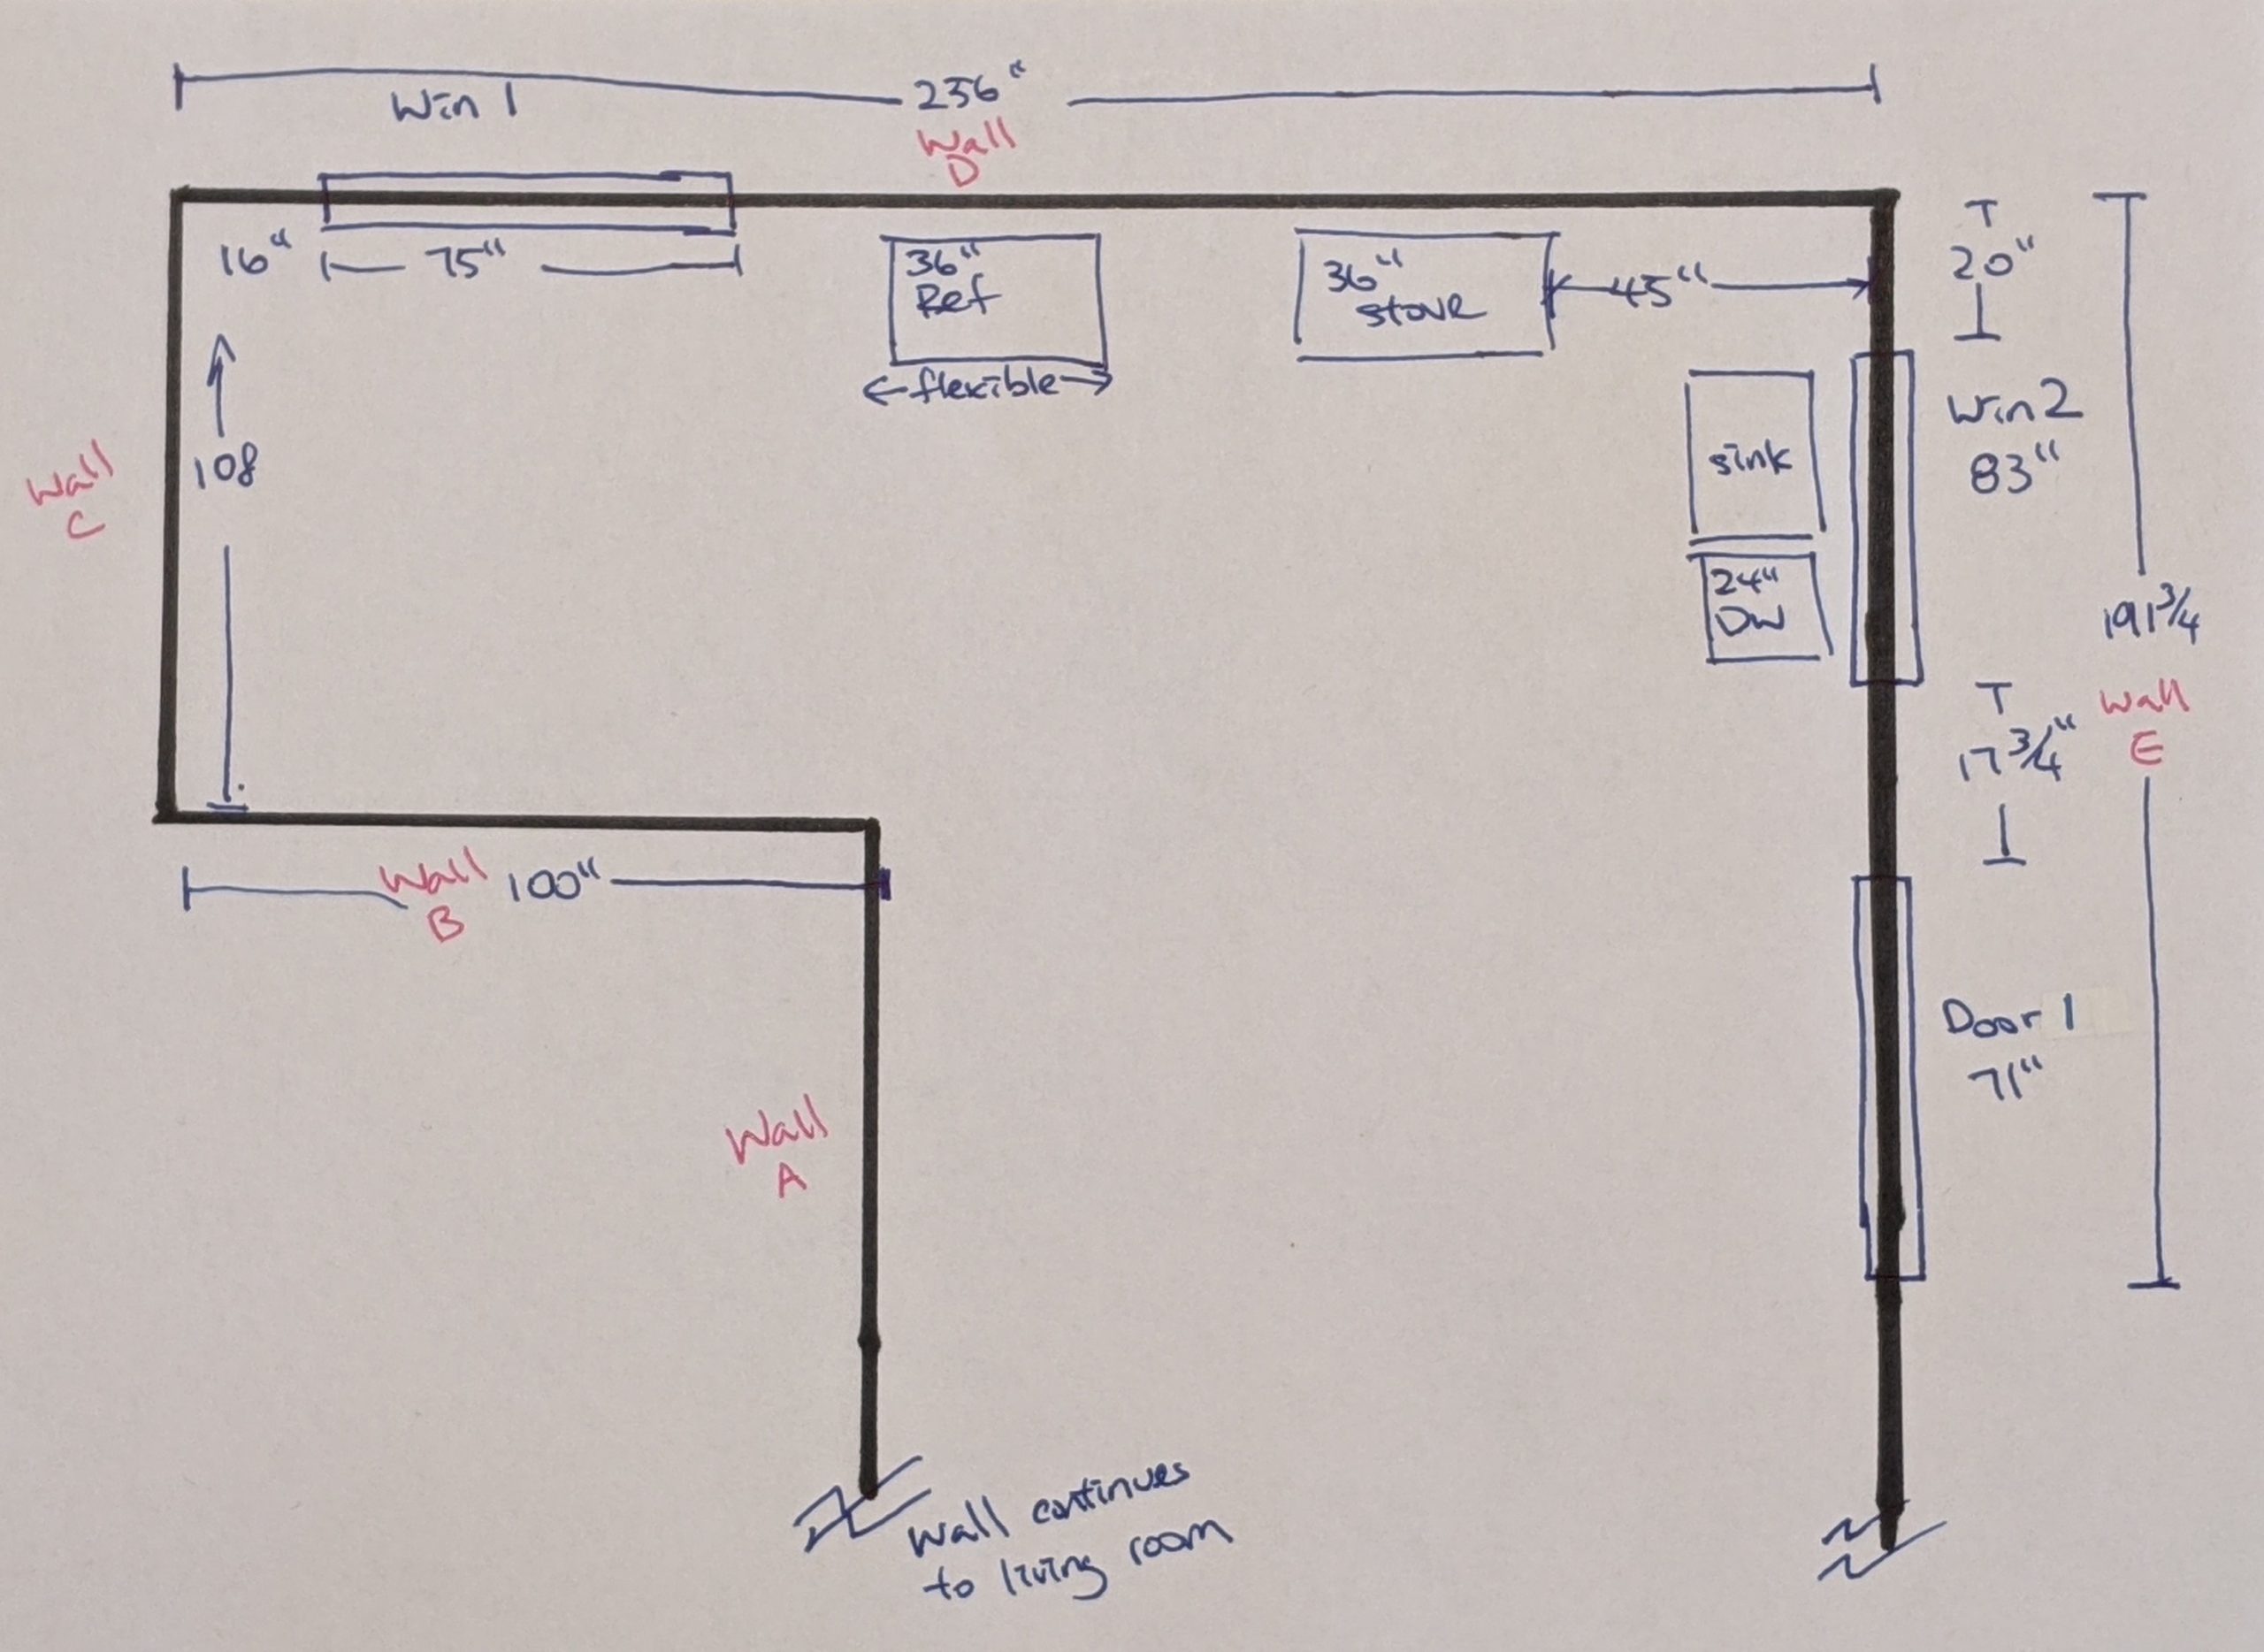 A sketch of a room with measurements for windows and door openings. Appliance locations are also noted.